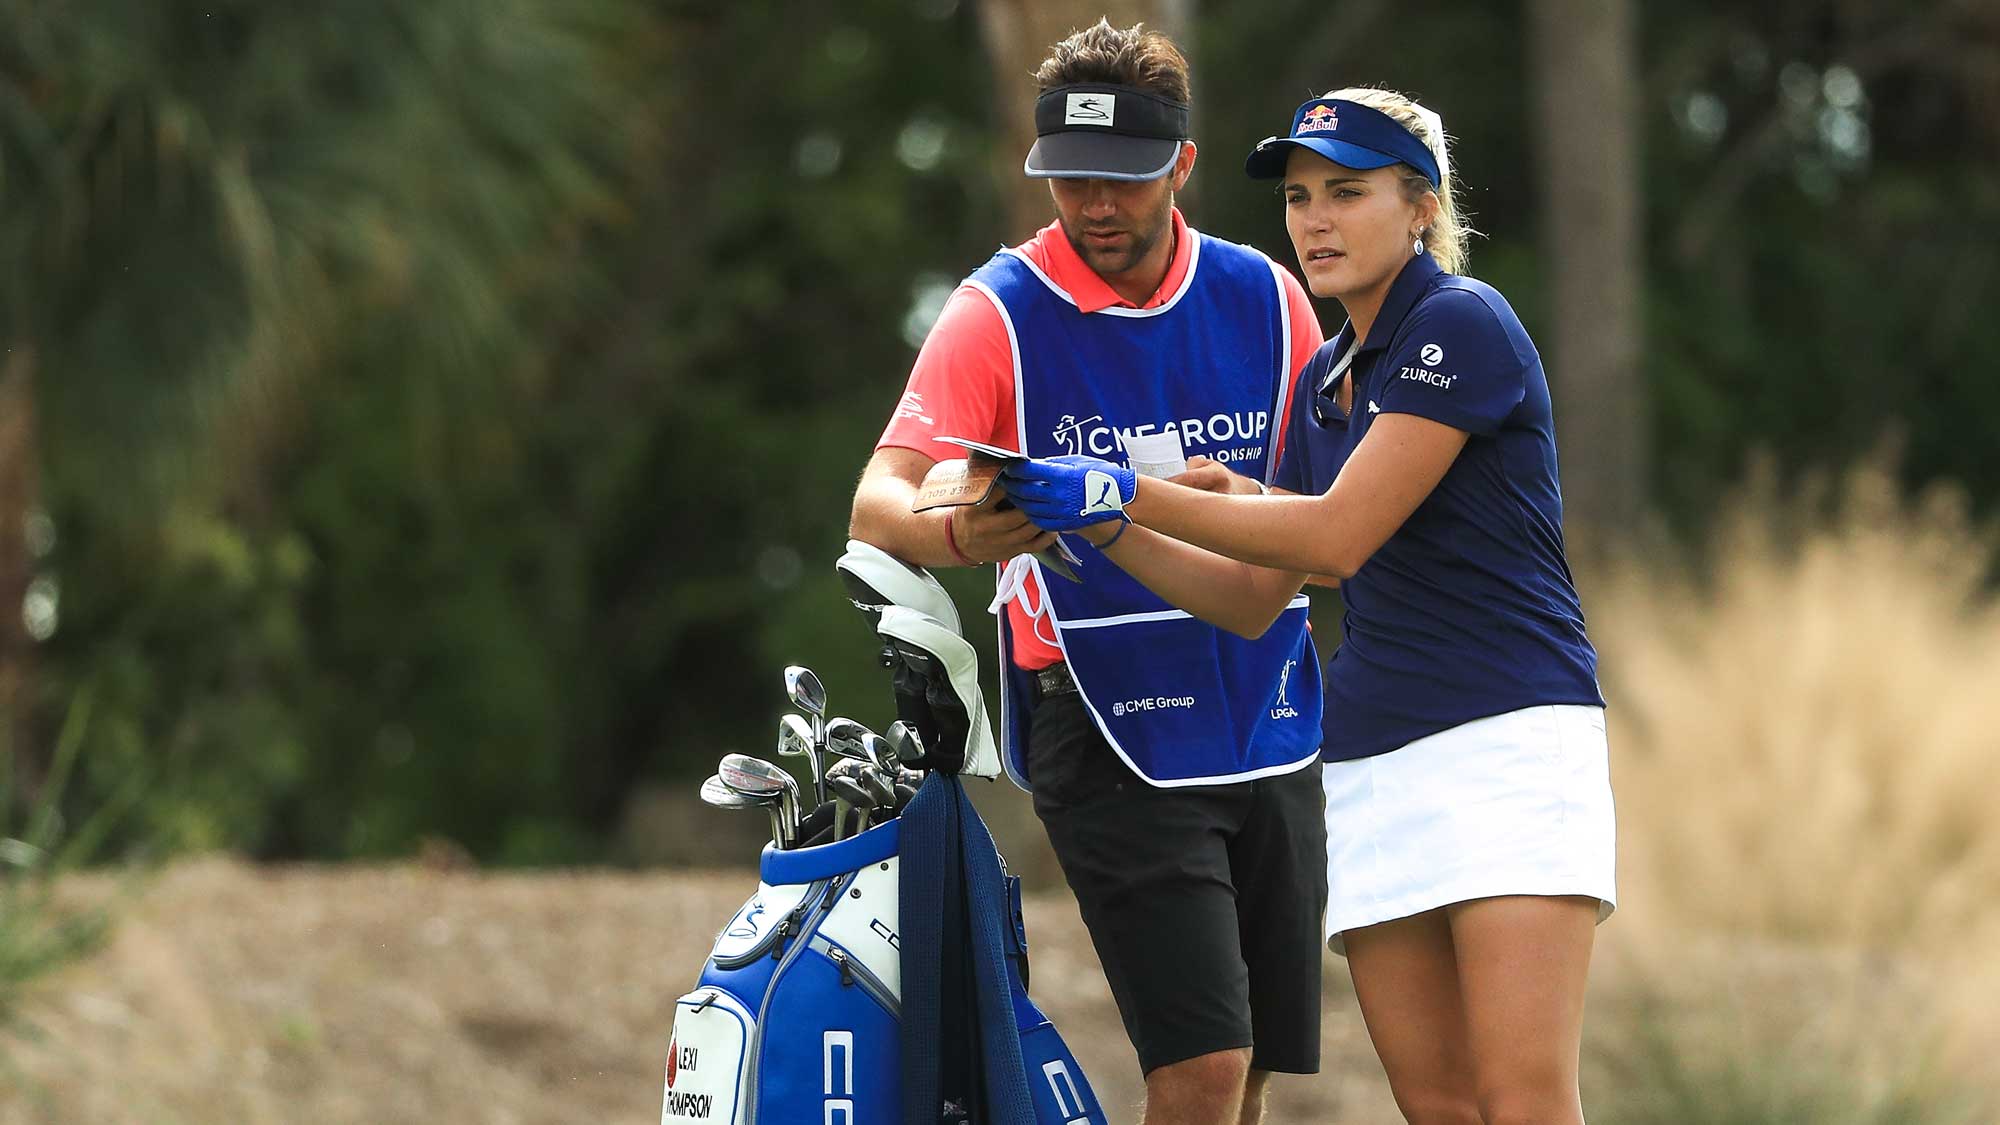 Lexi Thompson talks with her caddie on the second hole during the final round of the LPGA CME Group Tour Championship